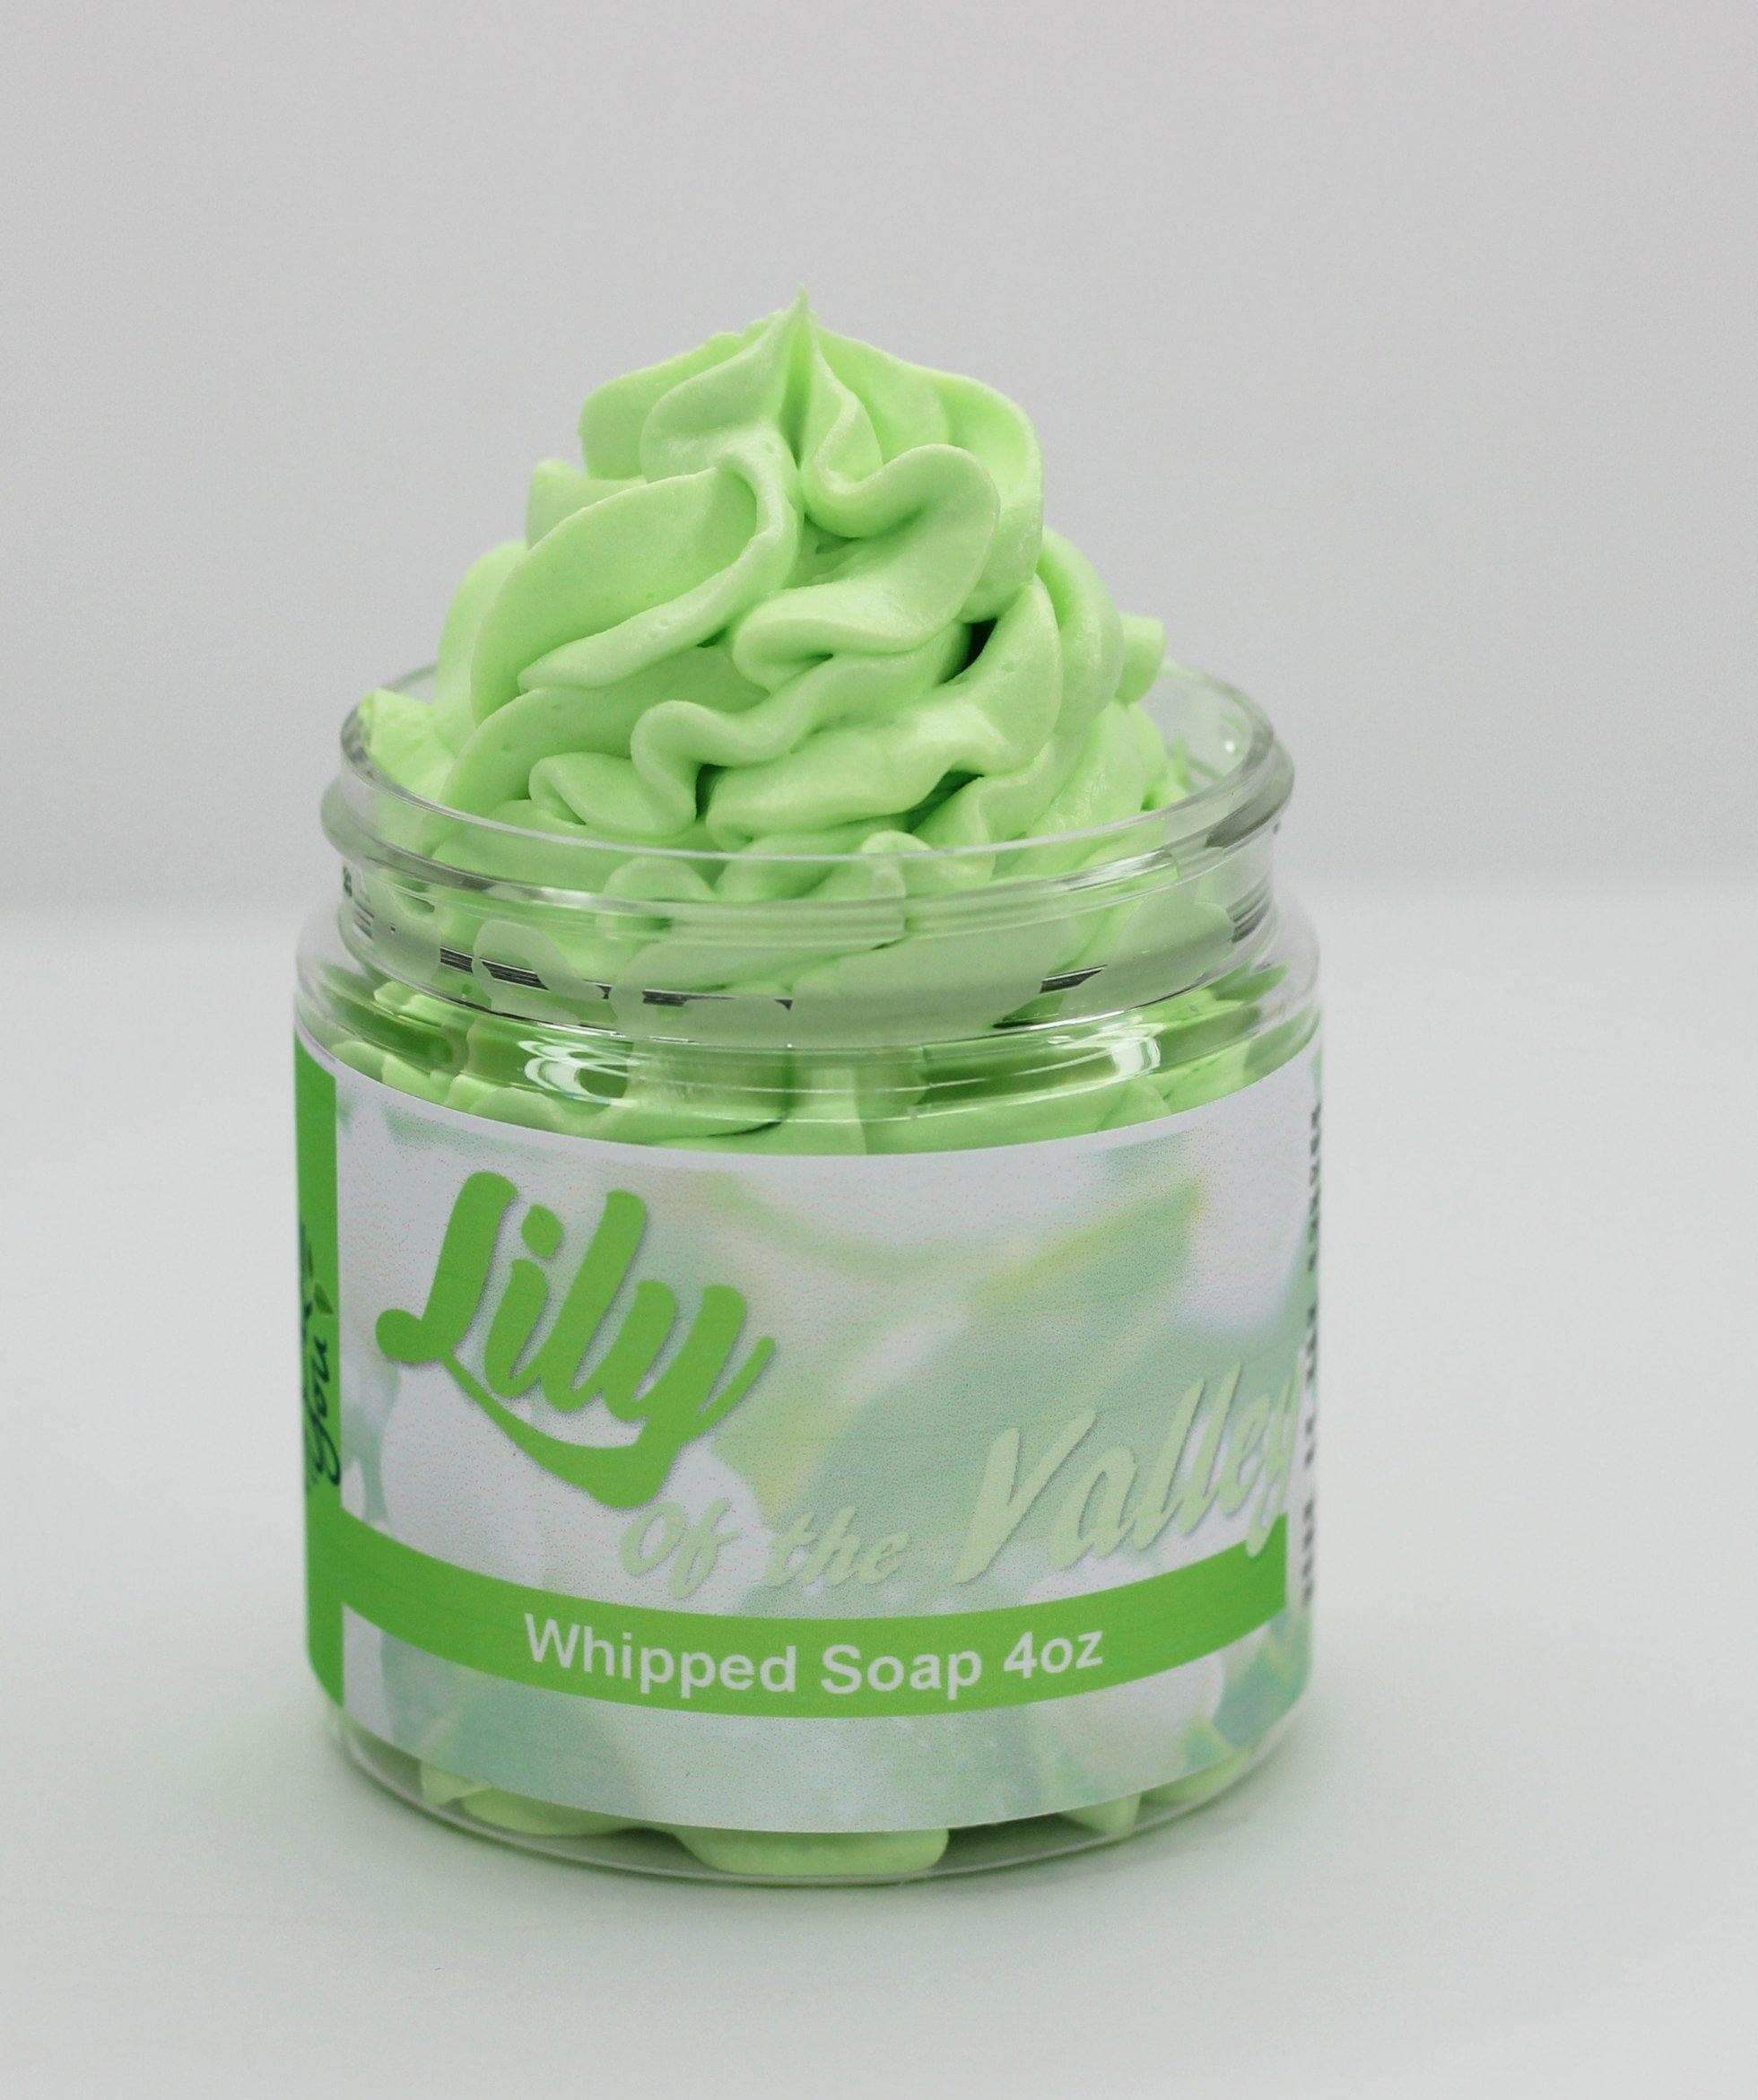 Lily of the Valley Whipped Soap - PureYou Handmade